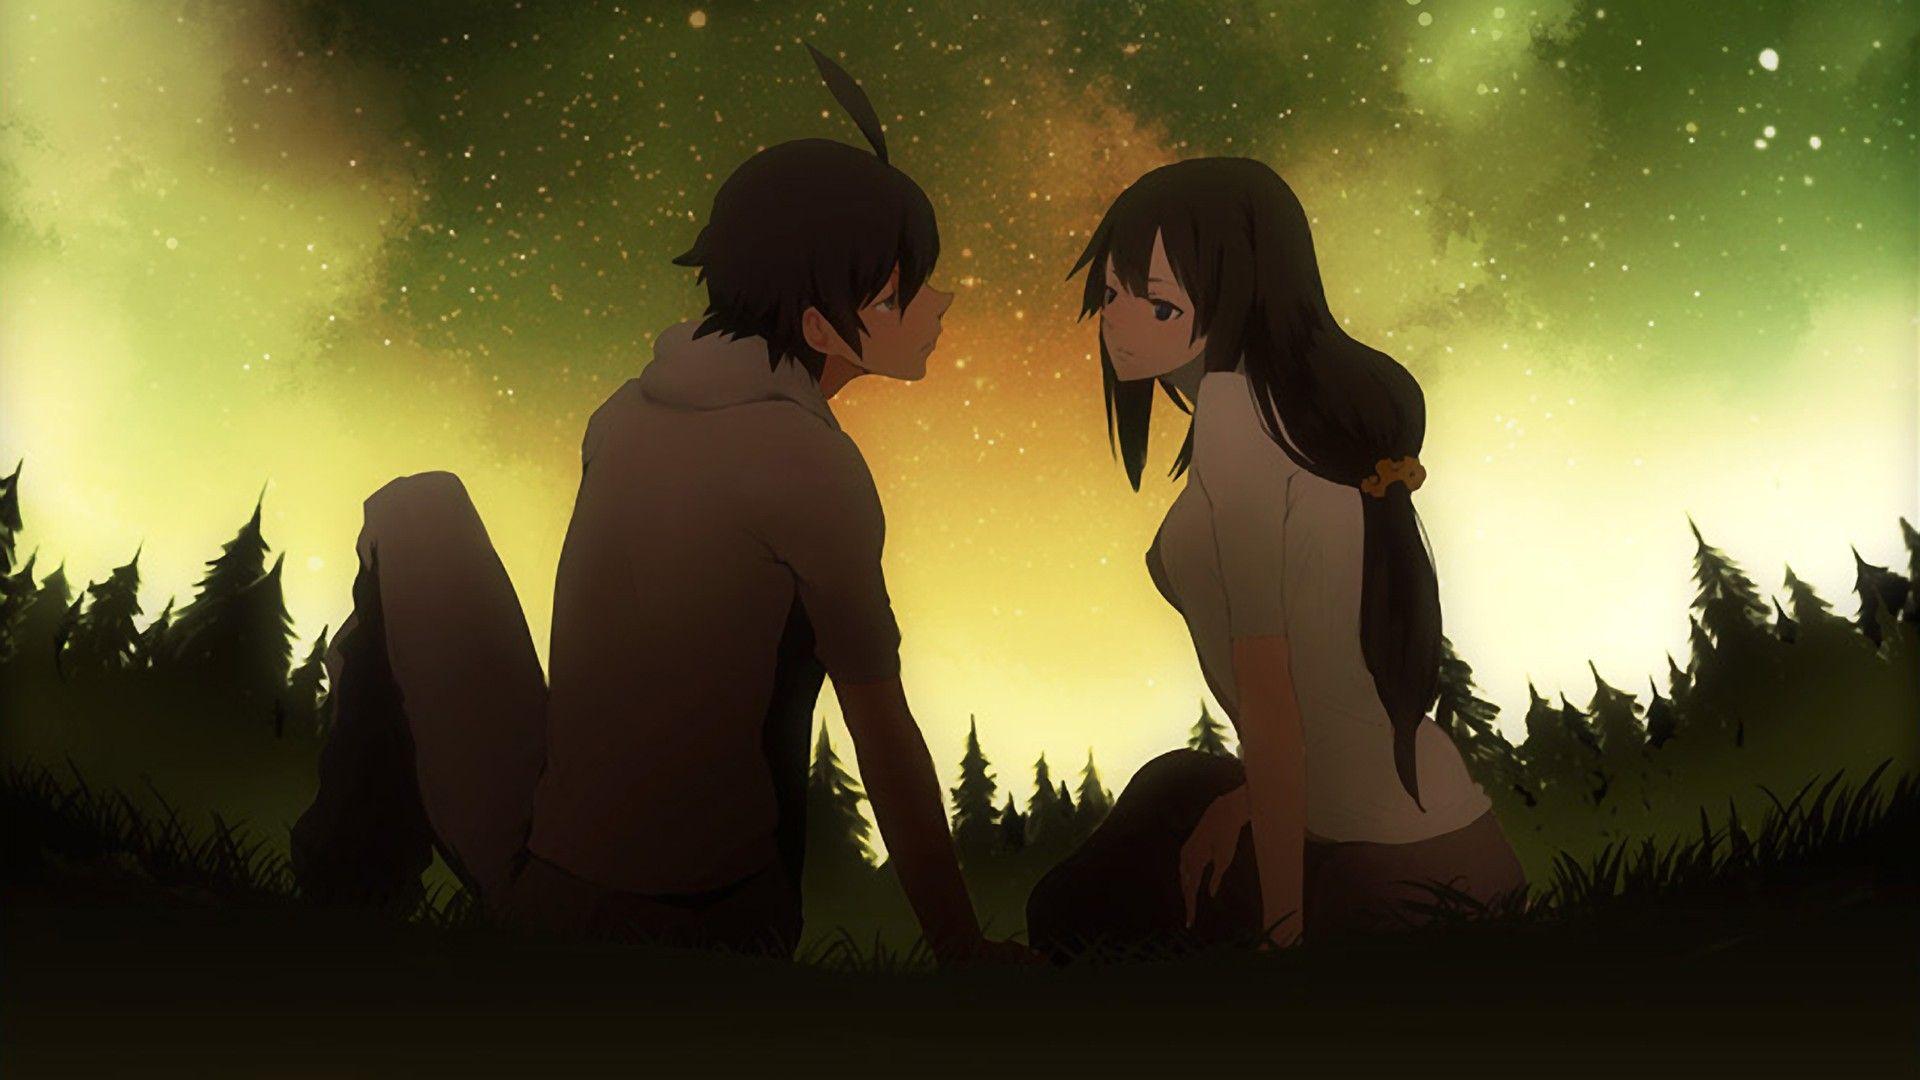 Wallpaper.wiki Free Download Cute Anime Couple Image PIC WPE0010866